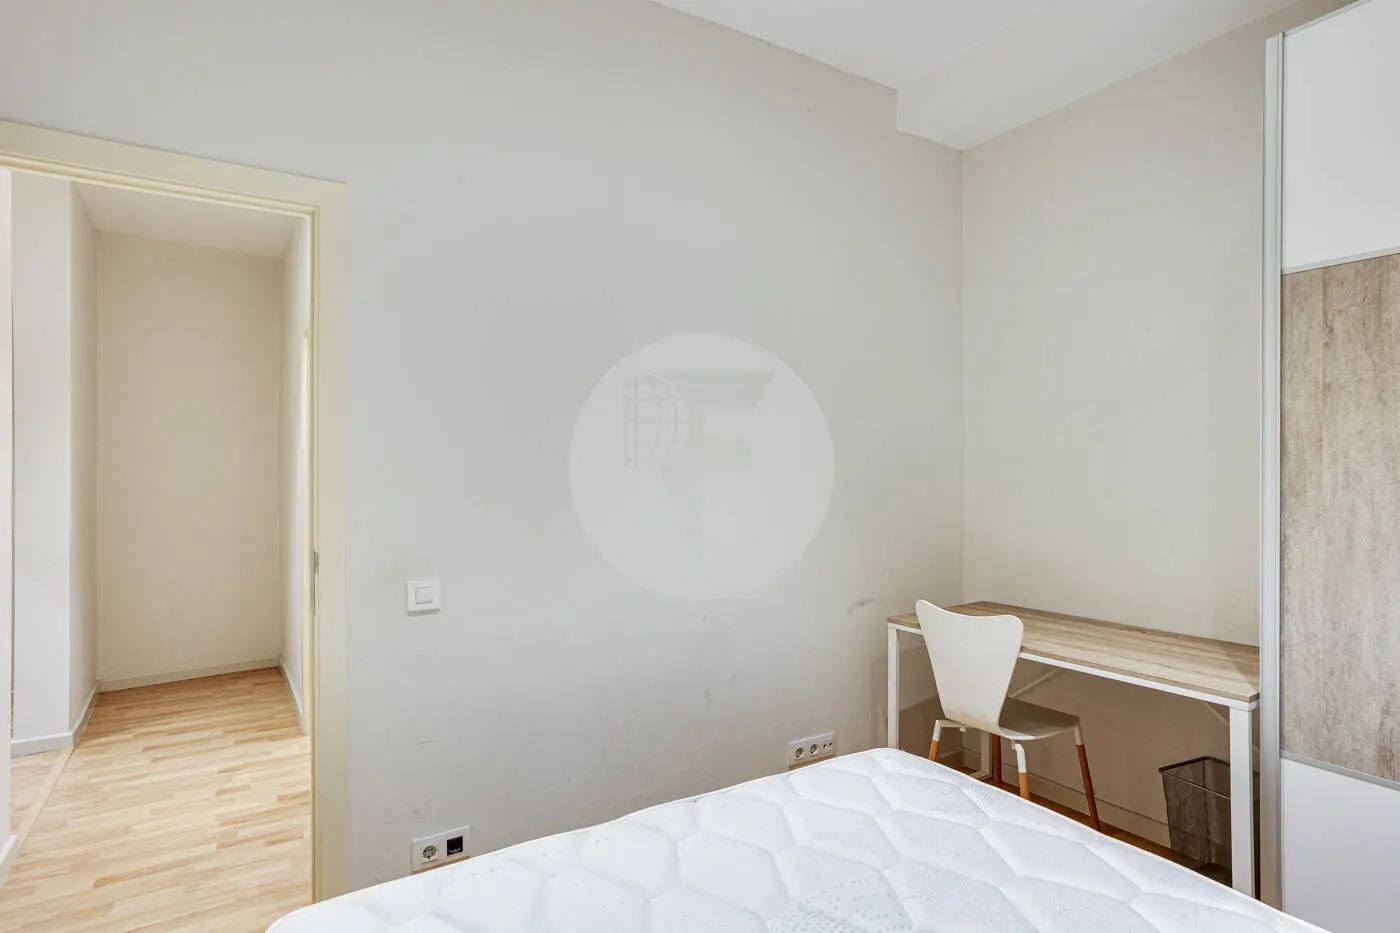 Magnificent apartment for sale next to Pl Universitat of 114m2 according to the land registry, located on Tallers Street in the Ciutat Vella neighborhood of Barcelona 17